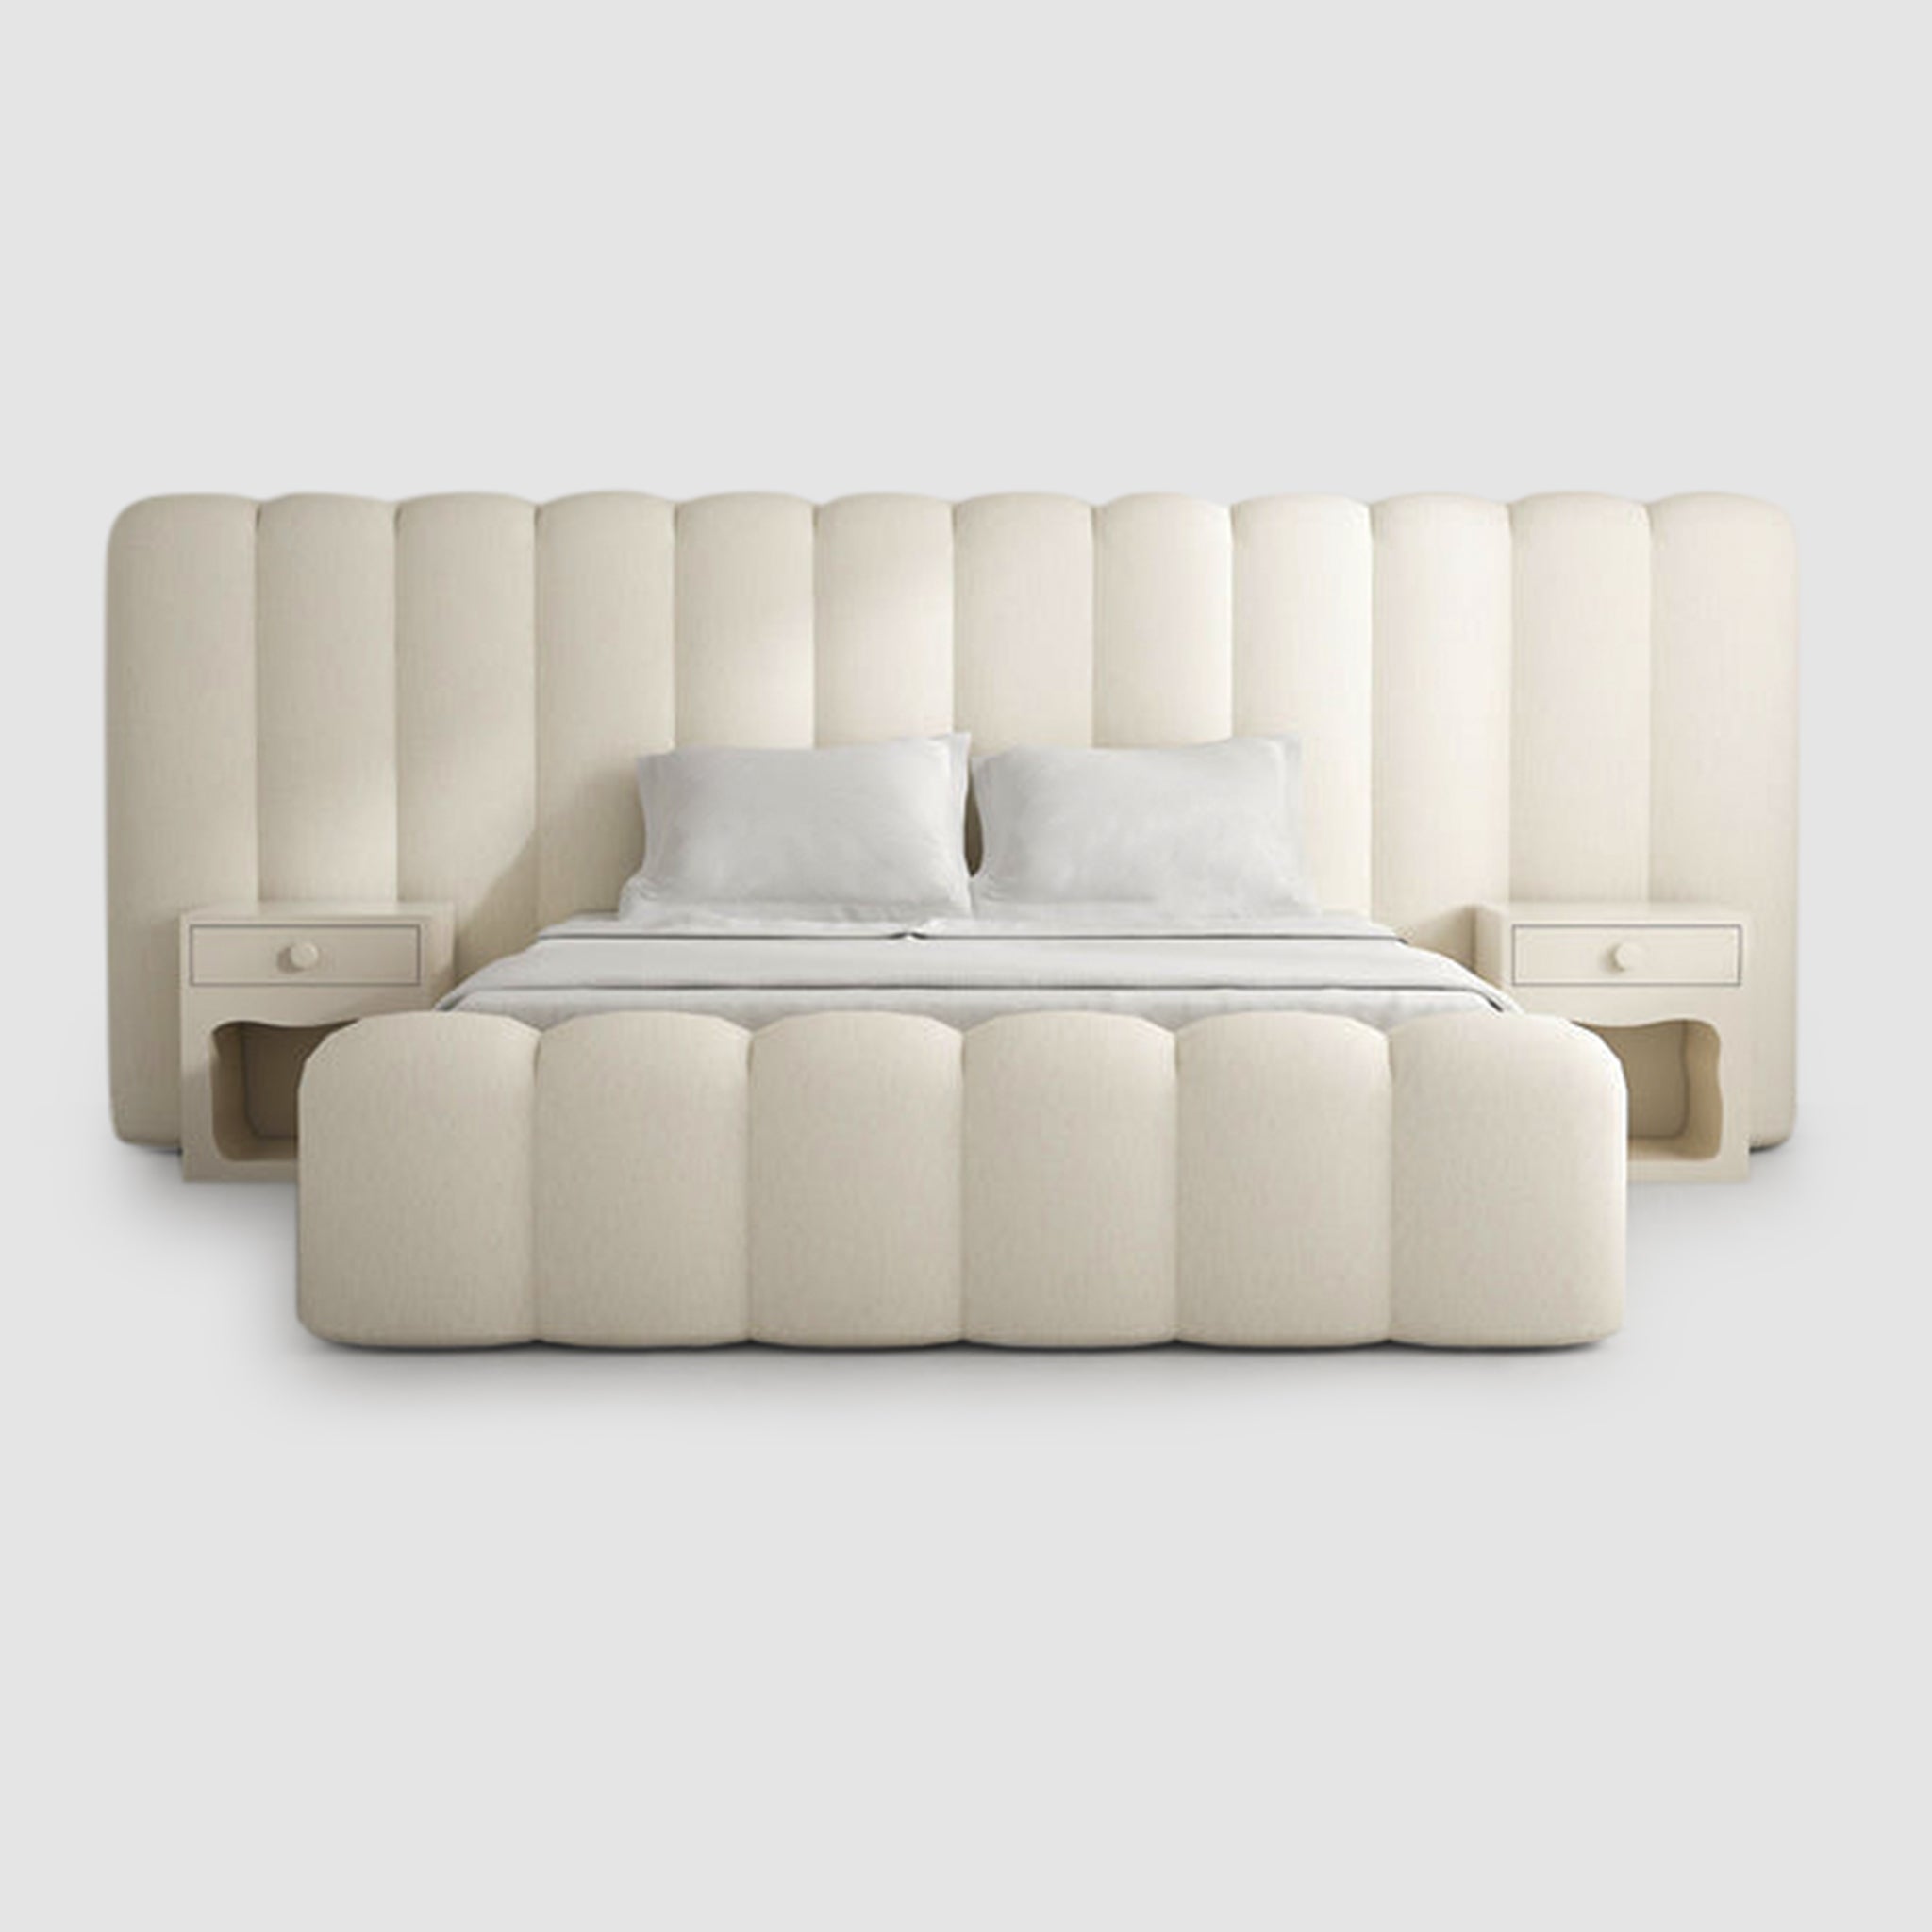 Luxurious king-size bed with a curved, button-tufted headboard. The Jemima Bed by Klettkic offers comfort and style for a modern bedroom.